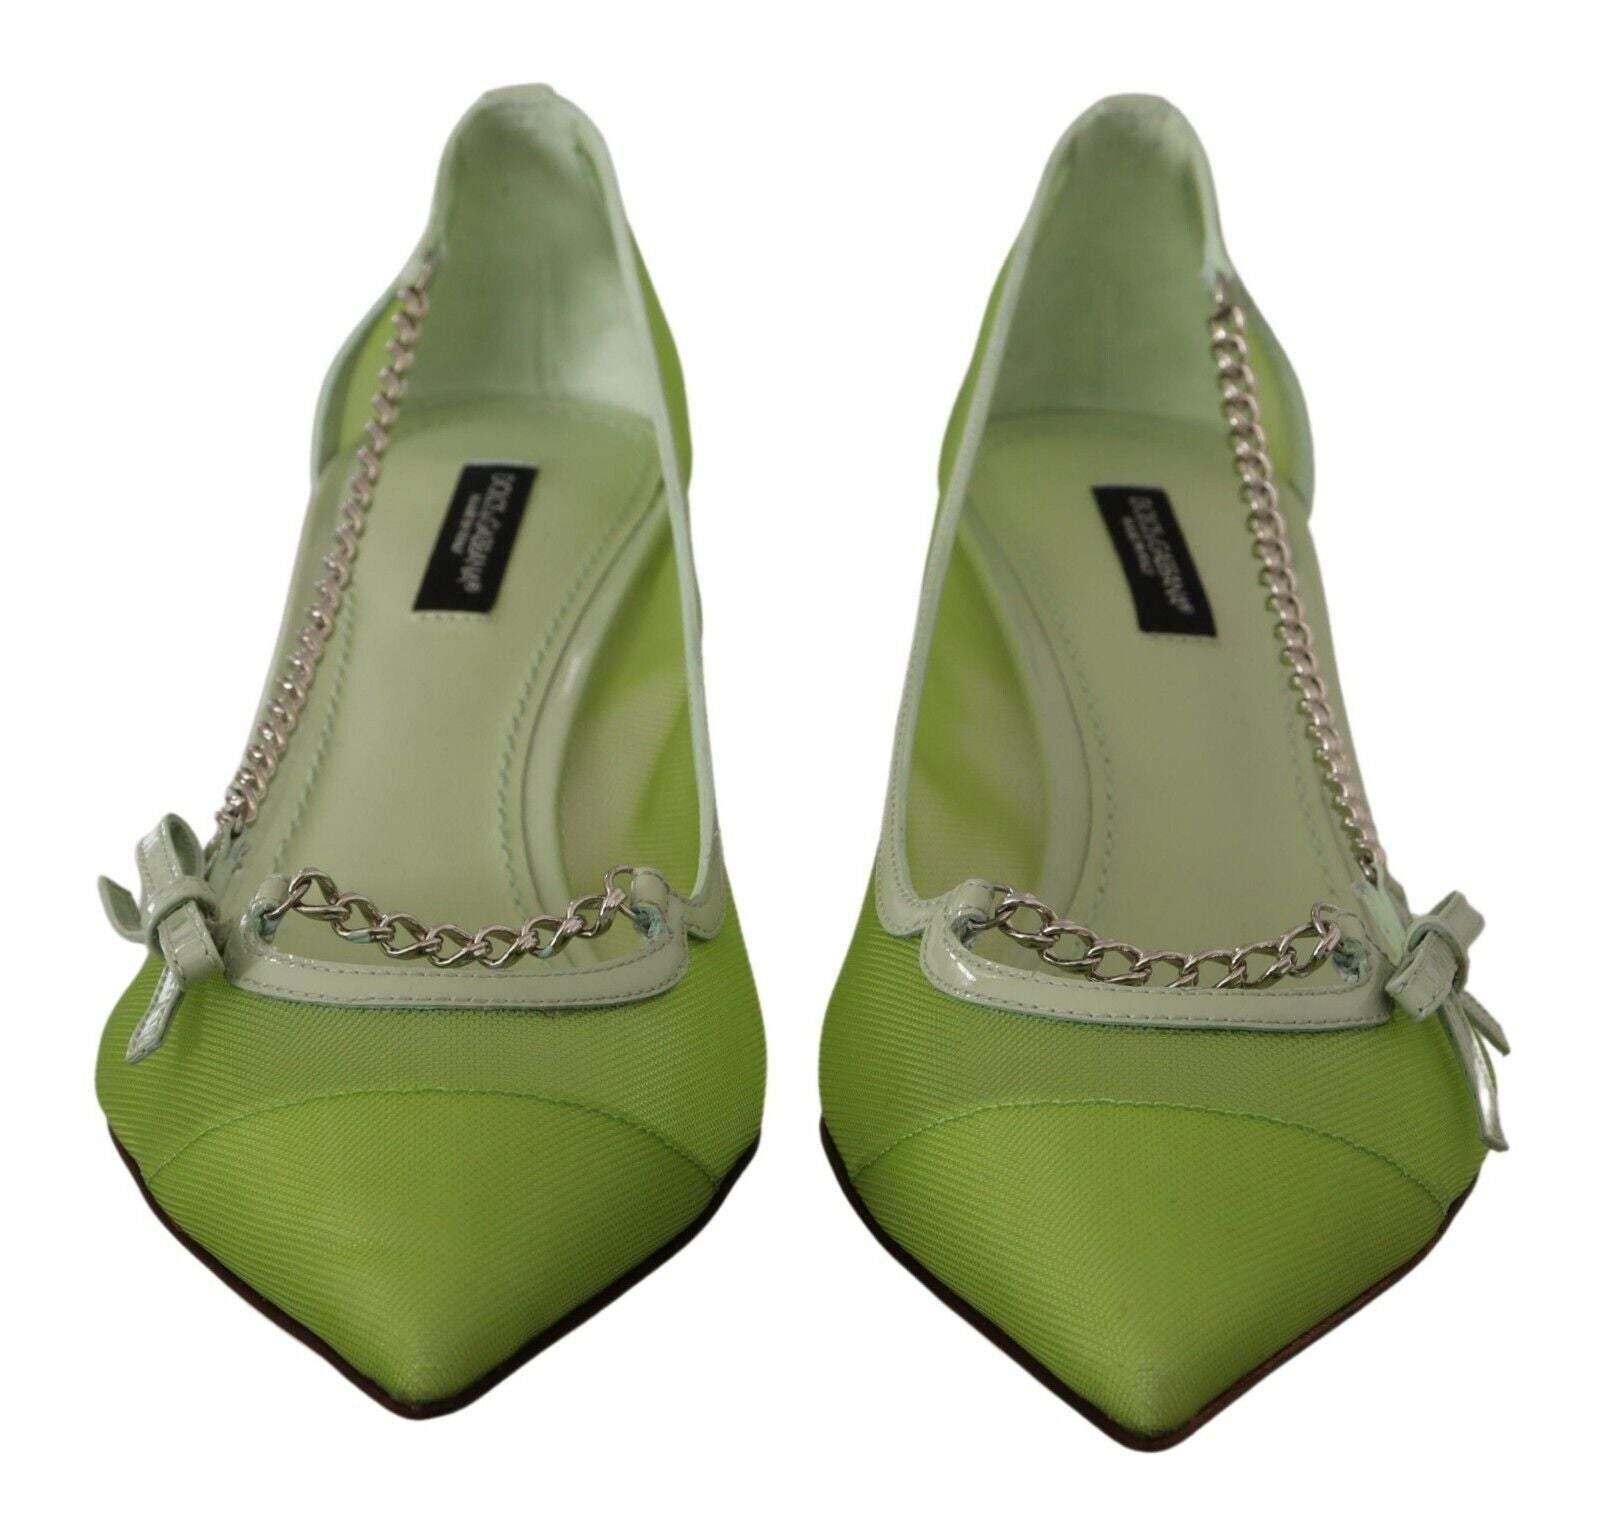 BEBO antix pointed heeled shoes in lime green | ASOS